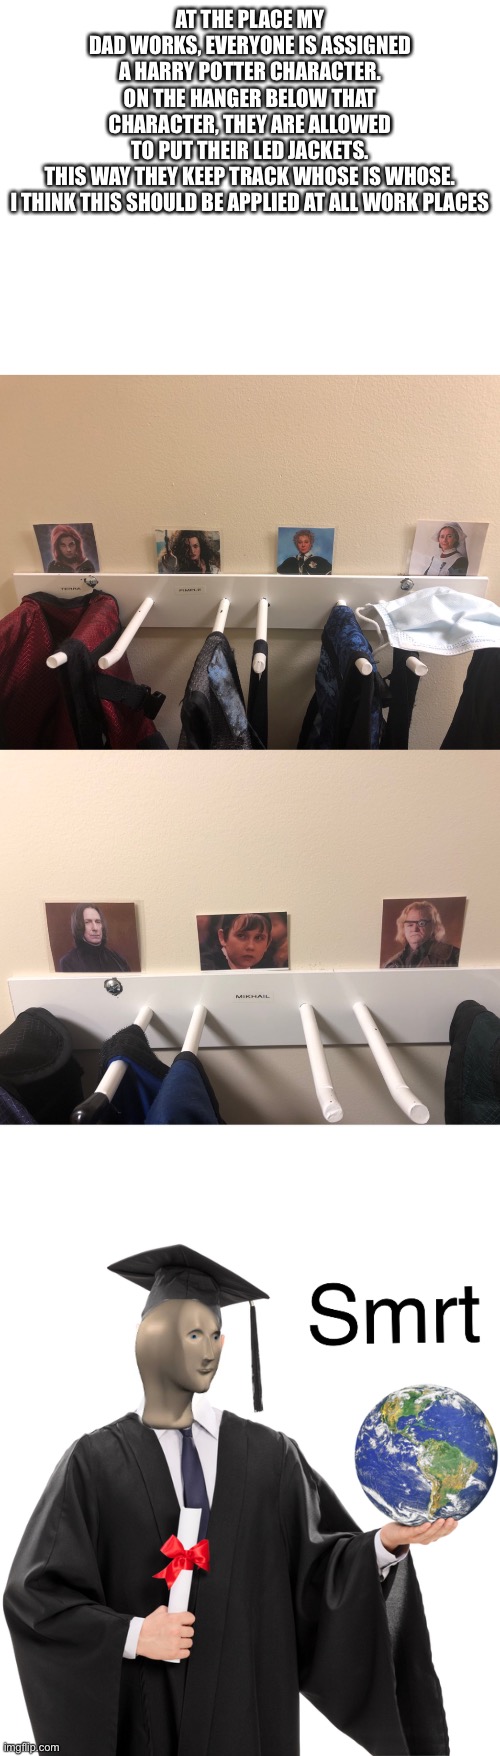 This is actually what they do. It should be everywhere | AT THE PLACE MY DAD WORKS, EVERYONE IS ASSIGNED A HARRY POTTER CHARACTER. ON THE HANGER BELOW THAT CHARACTER, THEY ARE ALLOWED TO PUT THEIR LED JACKETS. THIS WAY THEY KEEP TRACK WHOSE IS WHOSE.

I THINK THIS SHOULD BE APPLIED AT ALL WORK PLACES | image tagged in blank white template,meme man smart | made w/ Imgflip meme maker